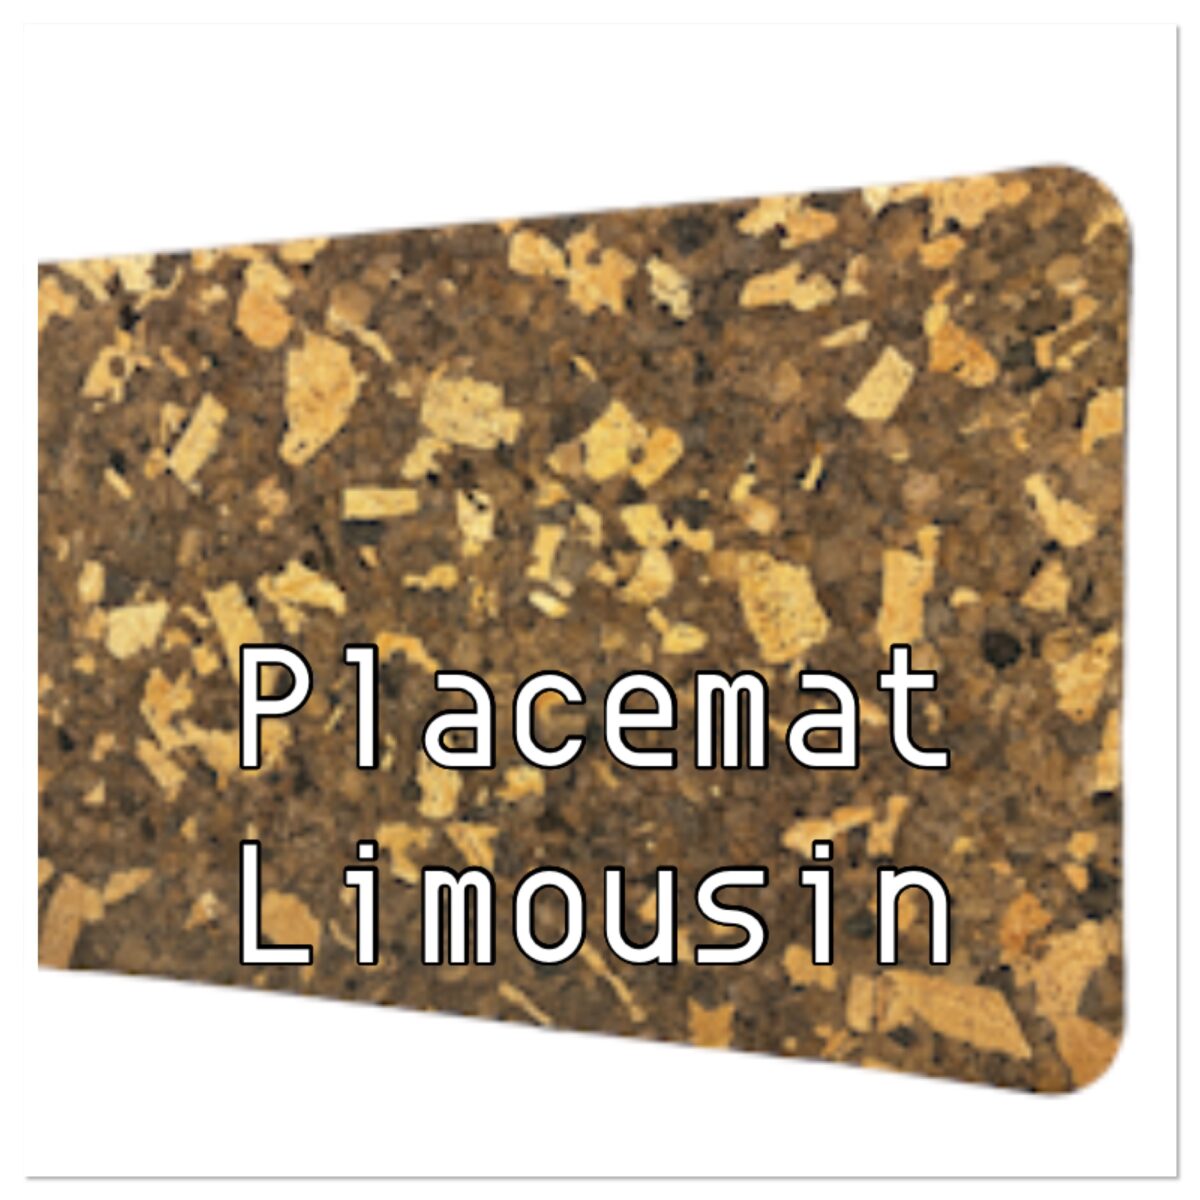 Placemat Limousin